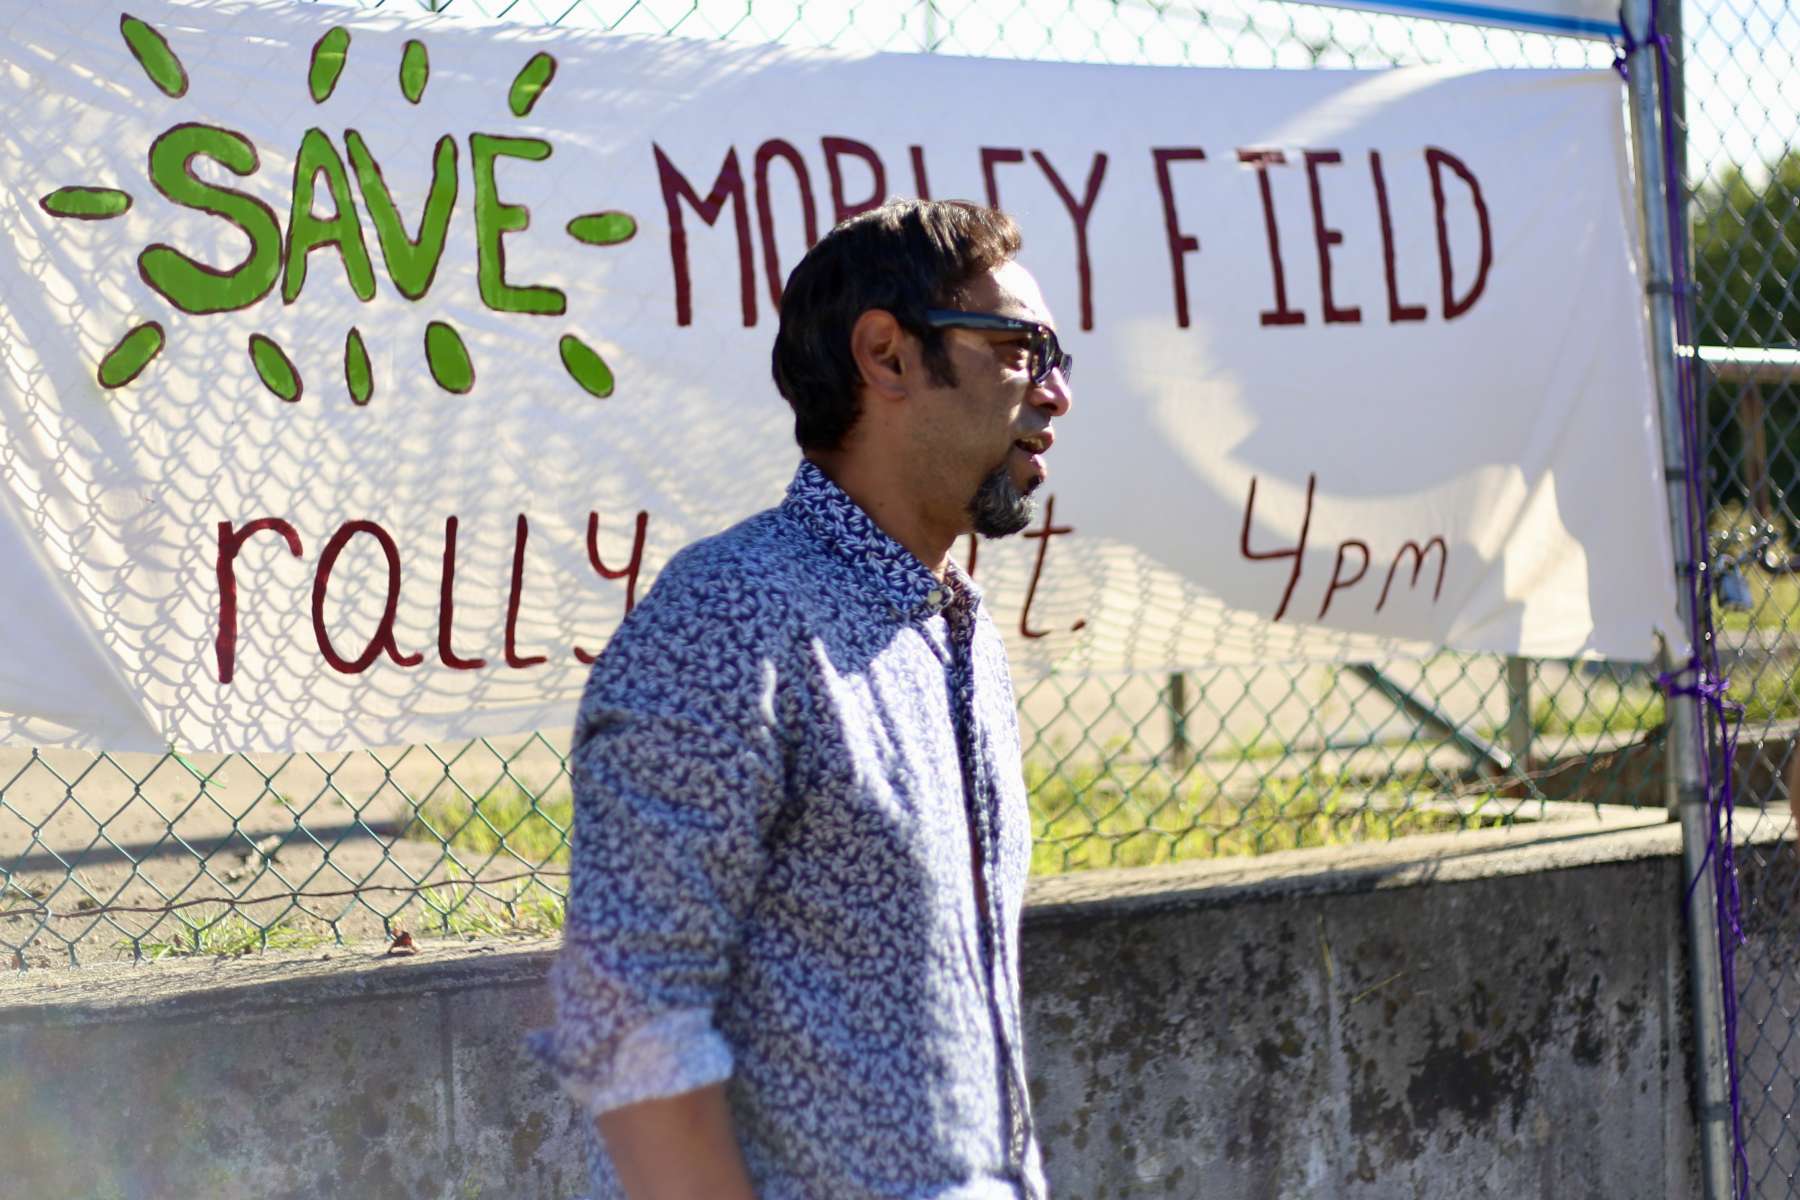 Pawtucket City Council discusses Morley Field sale as legal issues are raised